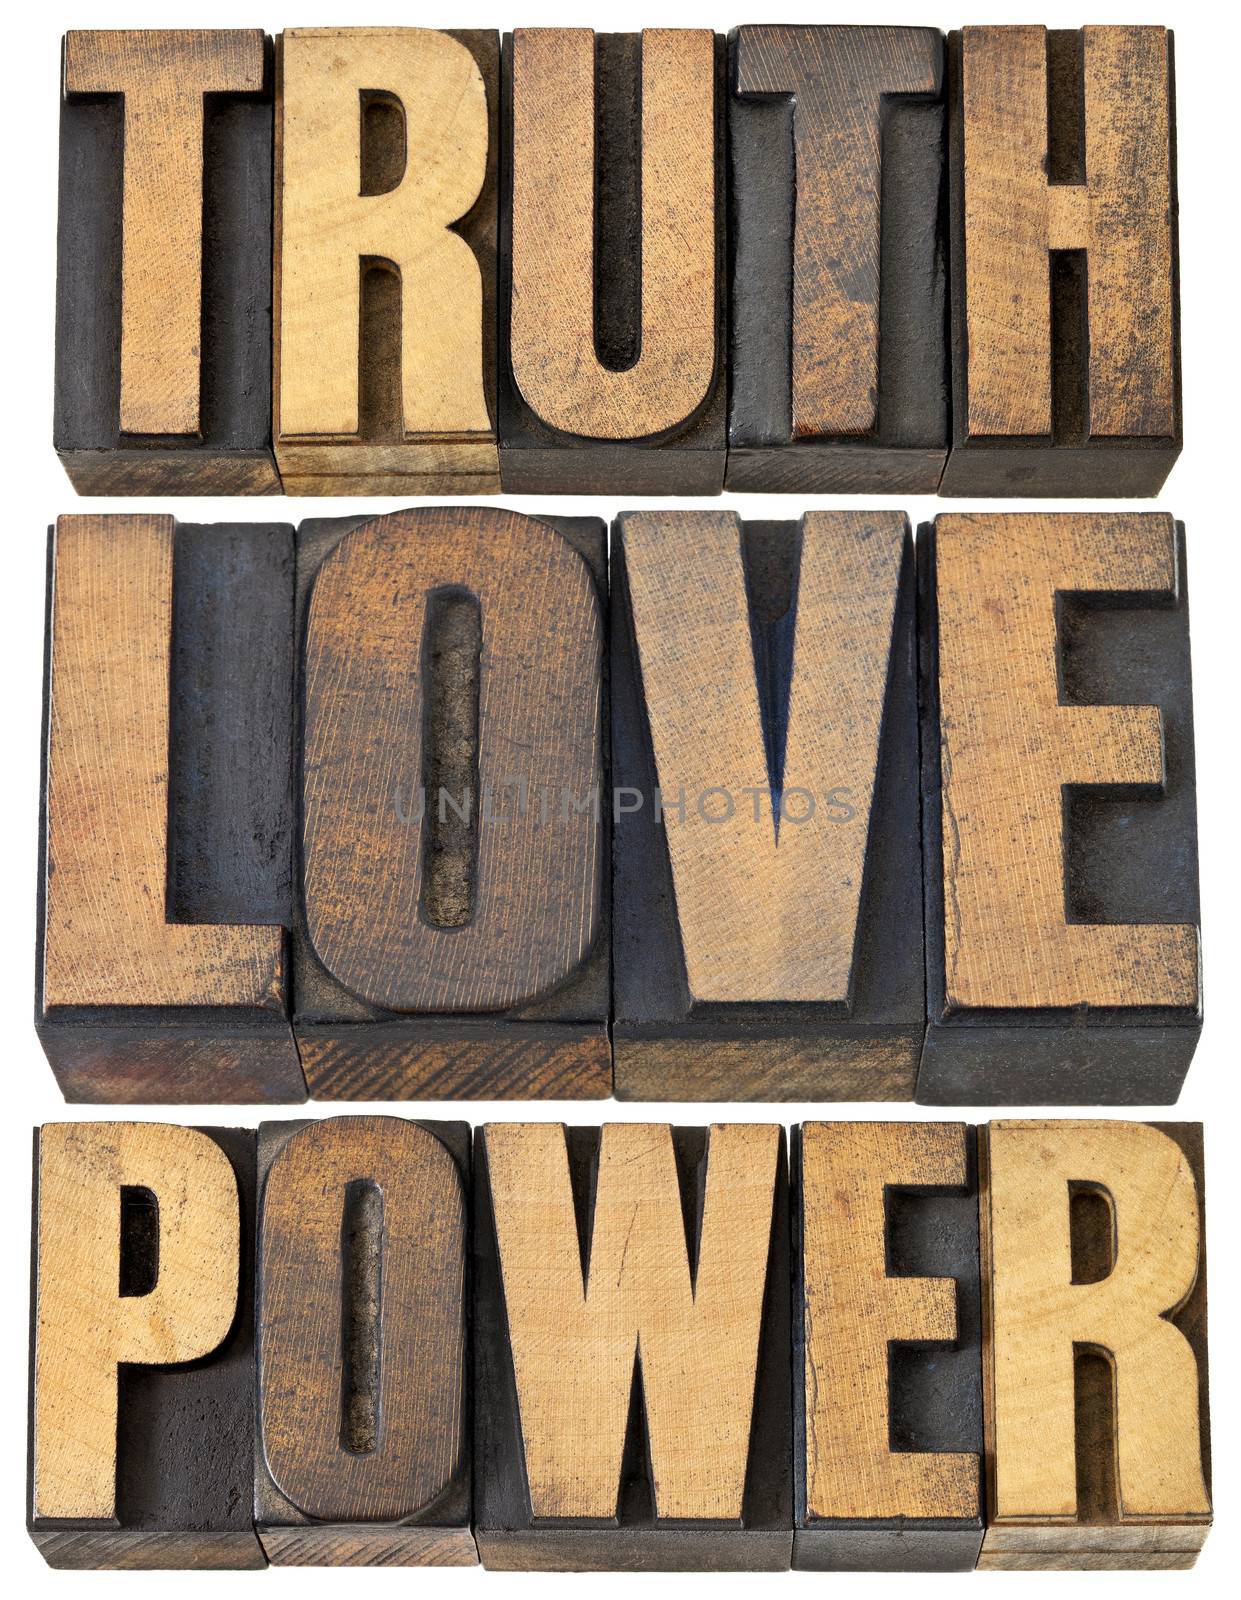 truth, love and power - core principles concept  -  a collage of isolated words in vintage letterpress wood type